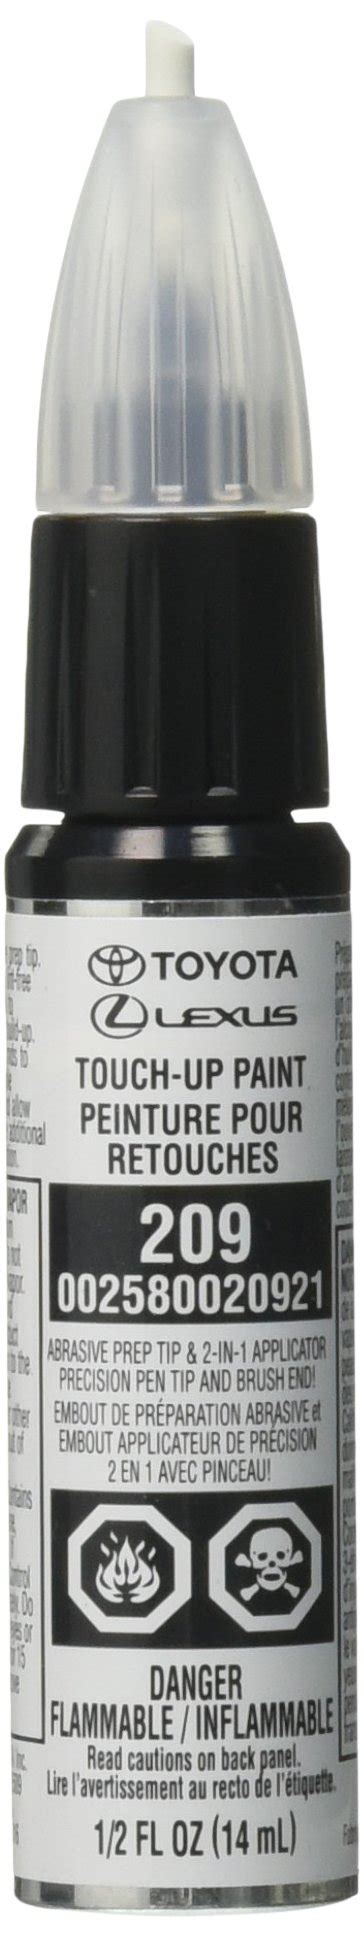 Buy Genuine Toyota 00258 00209 21 Black Mica Touch Up Paint Pen 44 Fl